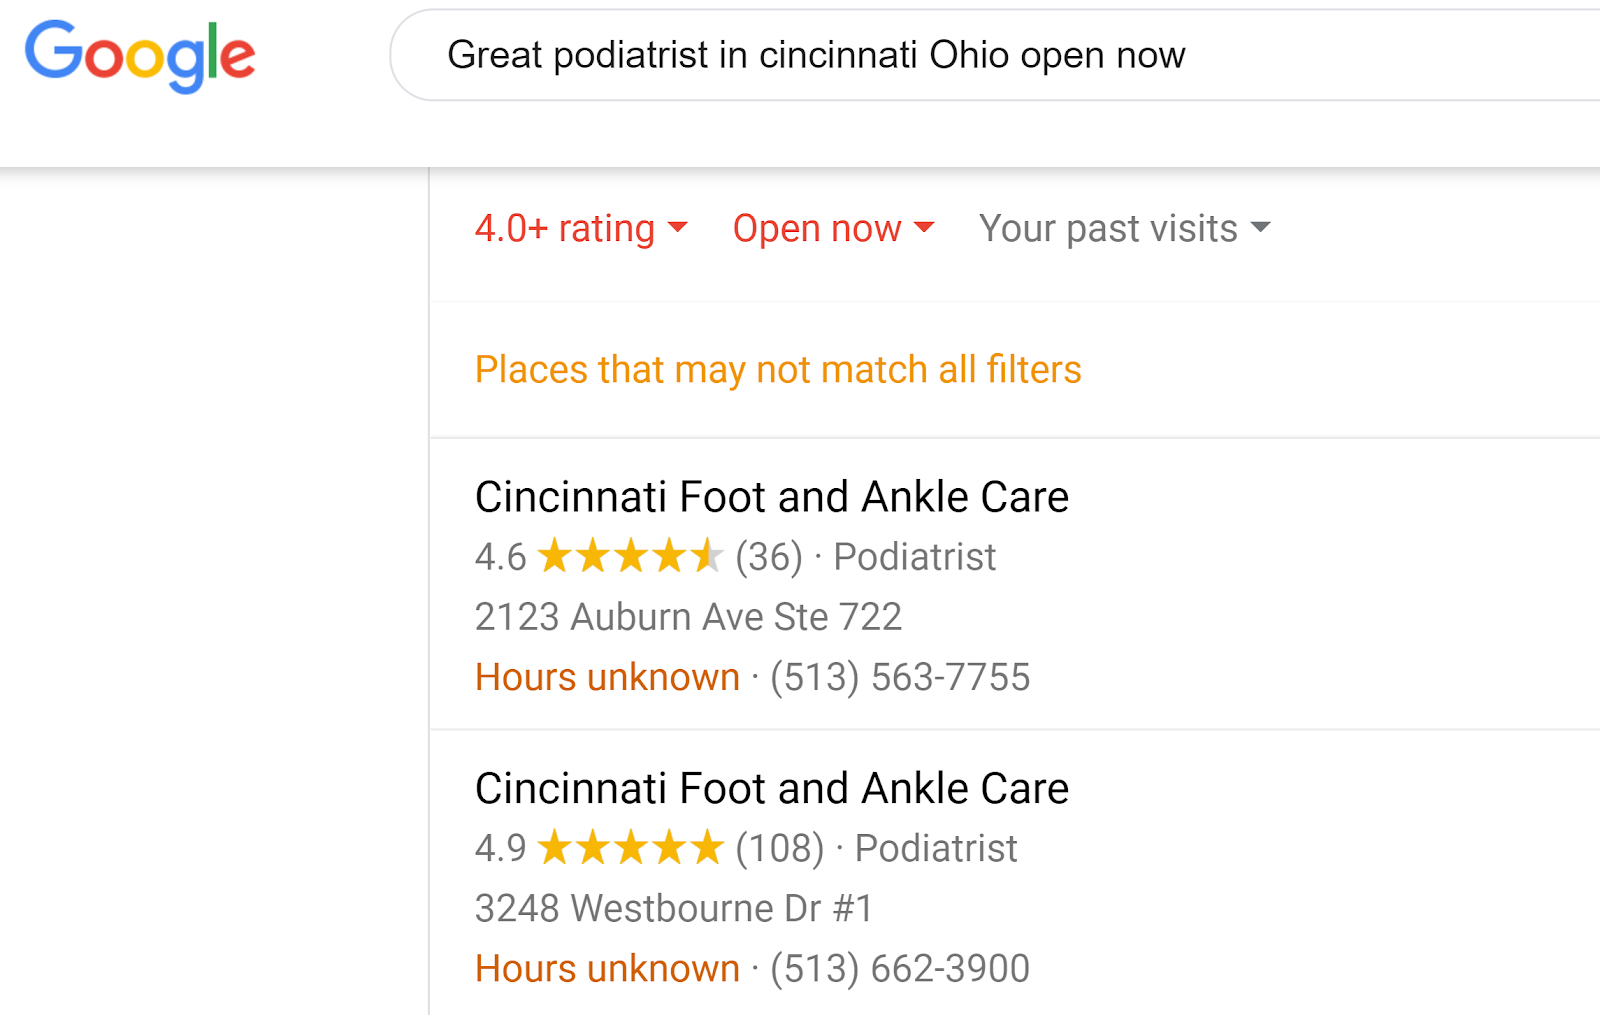 The image shows the results of a Google Search, made in California for a podiatrist in Ohio "open now." All the results feature CFAC, Cincinnati Foot and Ankle Care. However, there is an additional message indicating their hours are unknown. This highlights the need for any medical or dental practice to keep their Google My Business listing up to date.